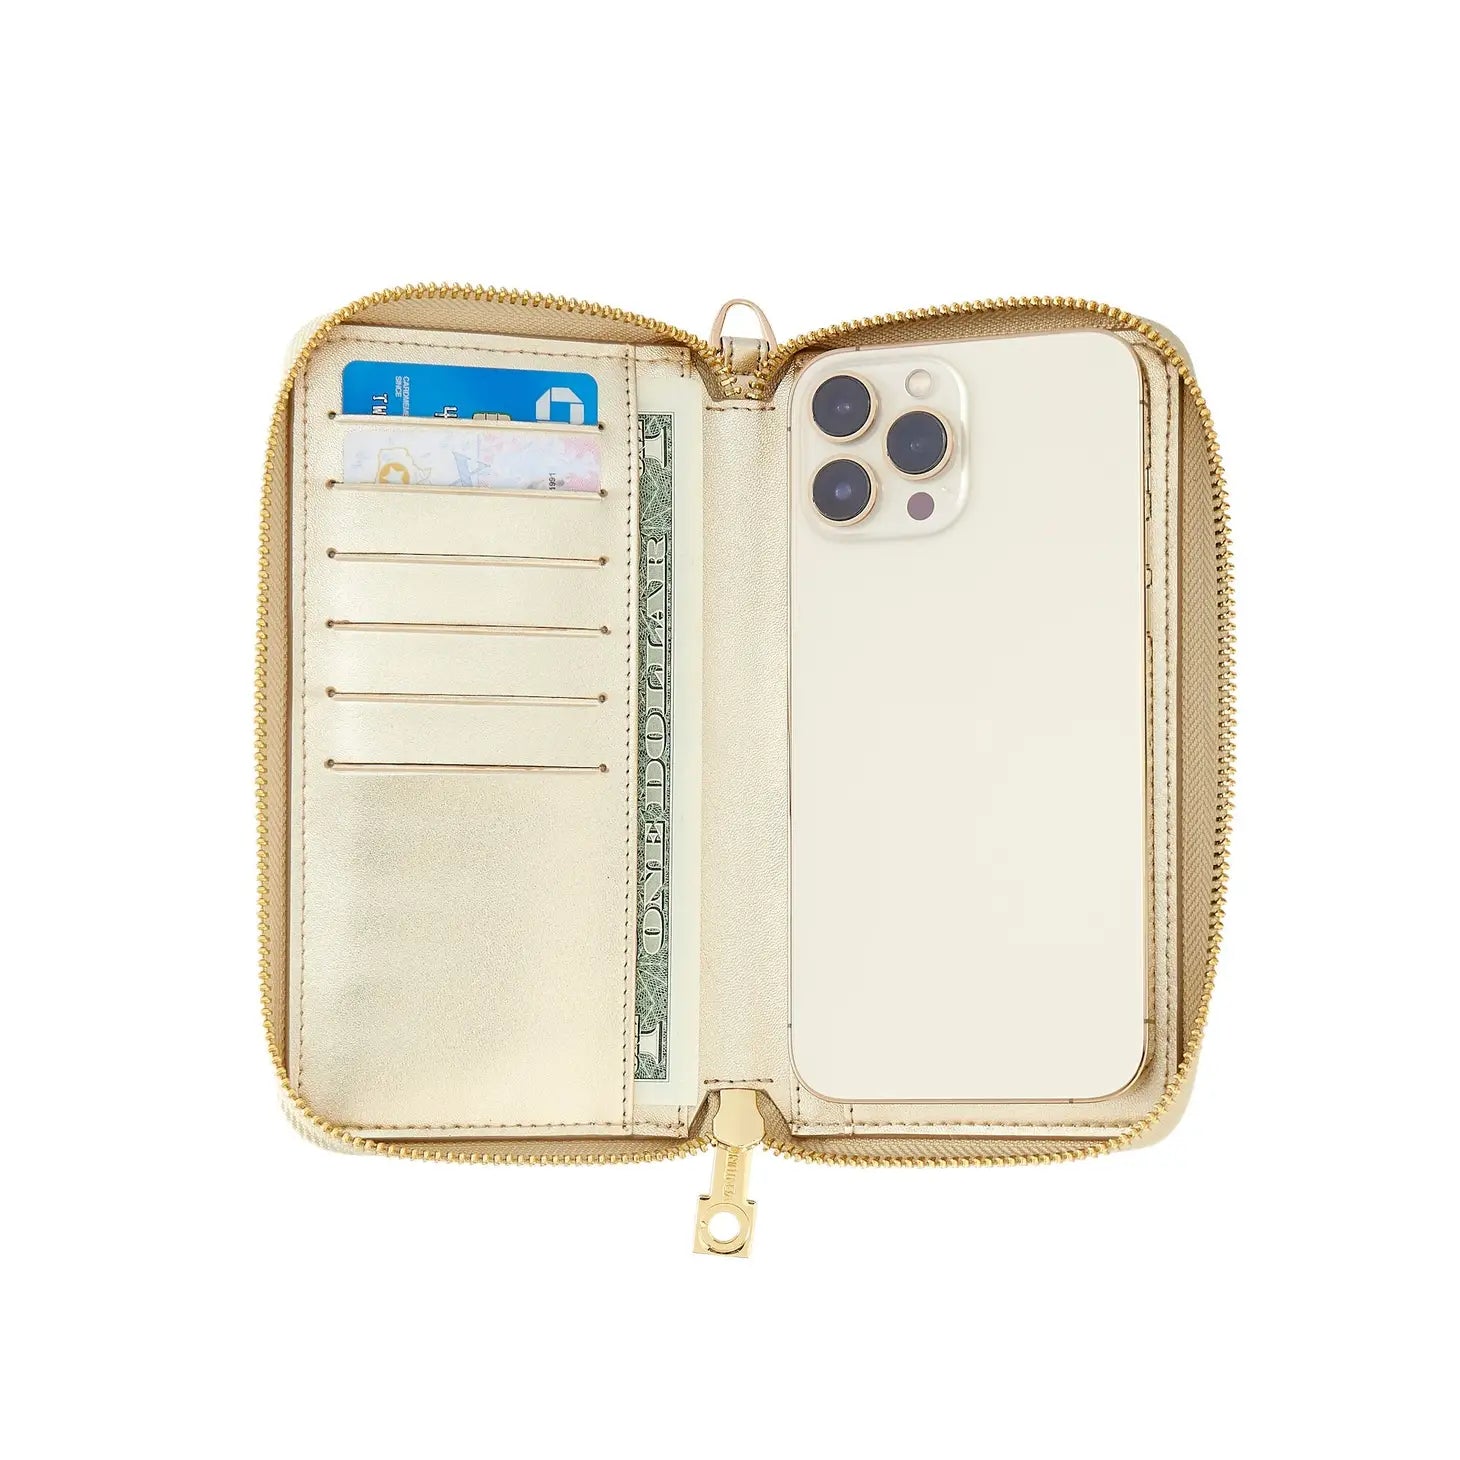 Ossential Zip Around Card Case - Assorted Colors